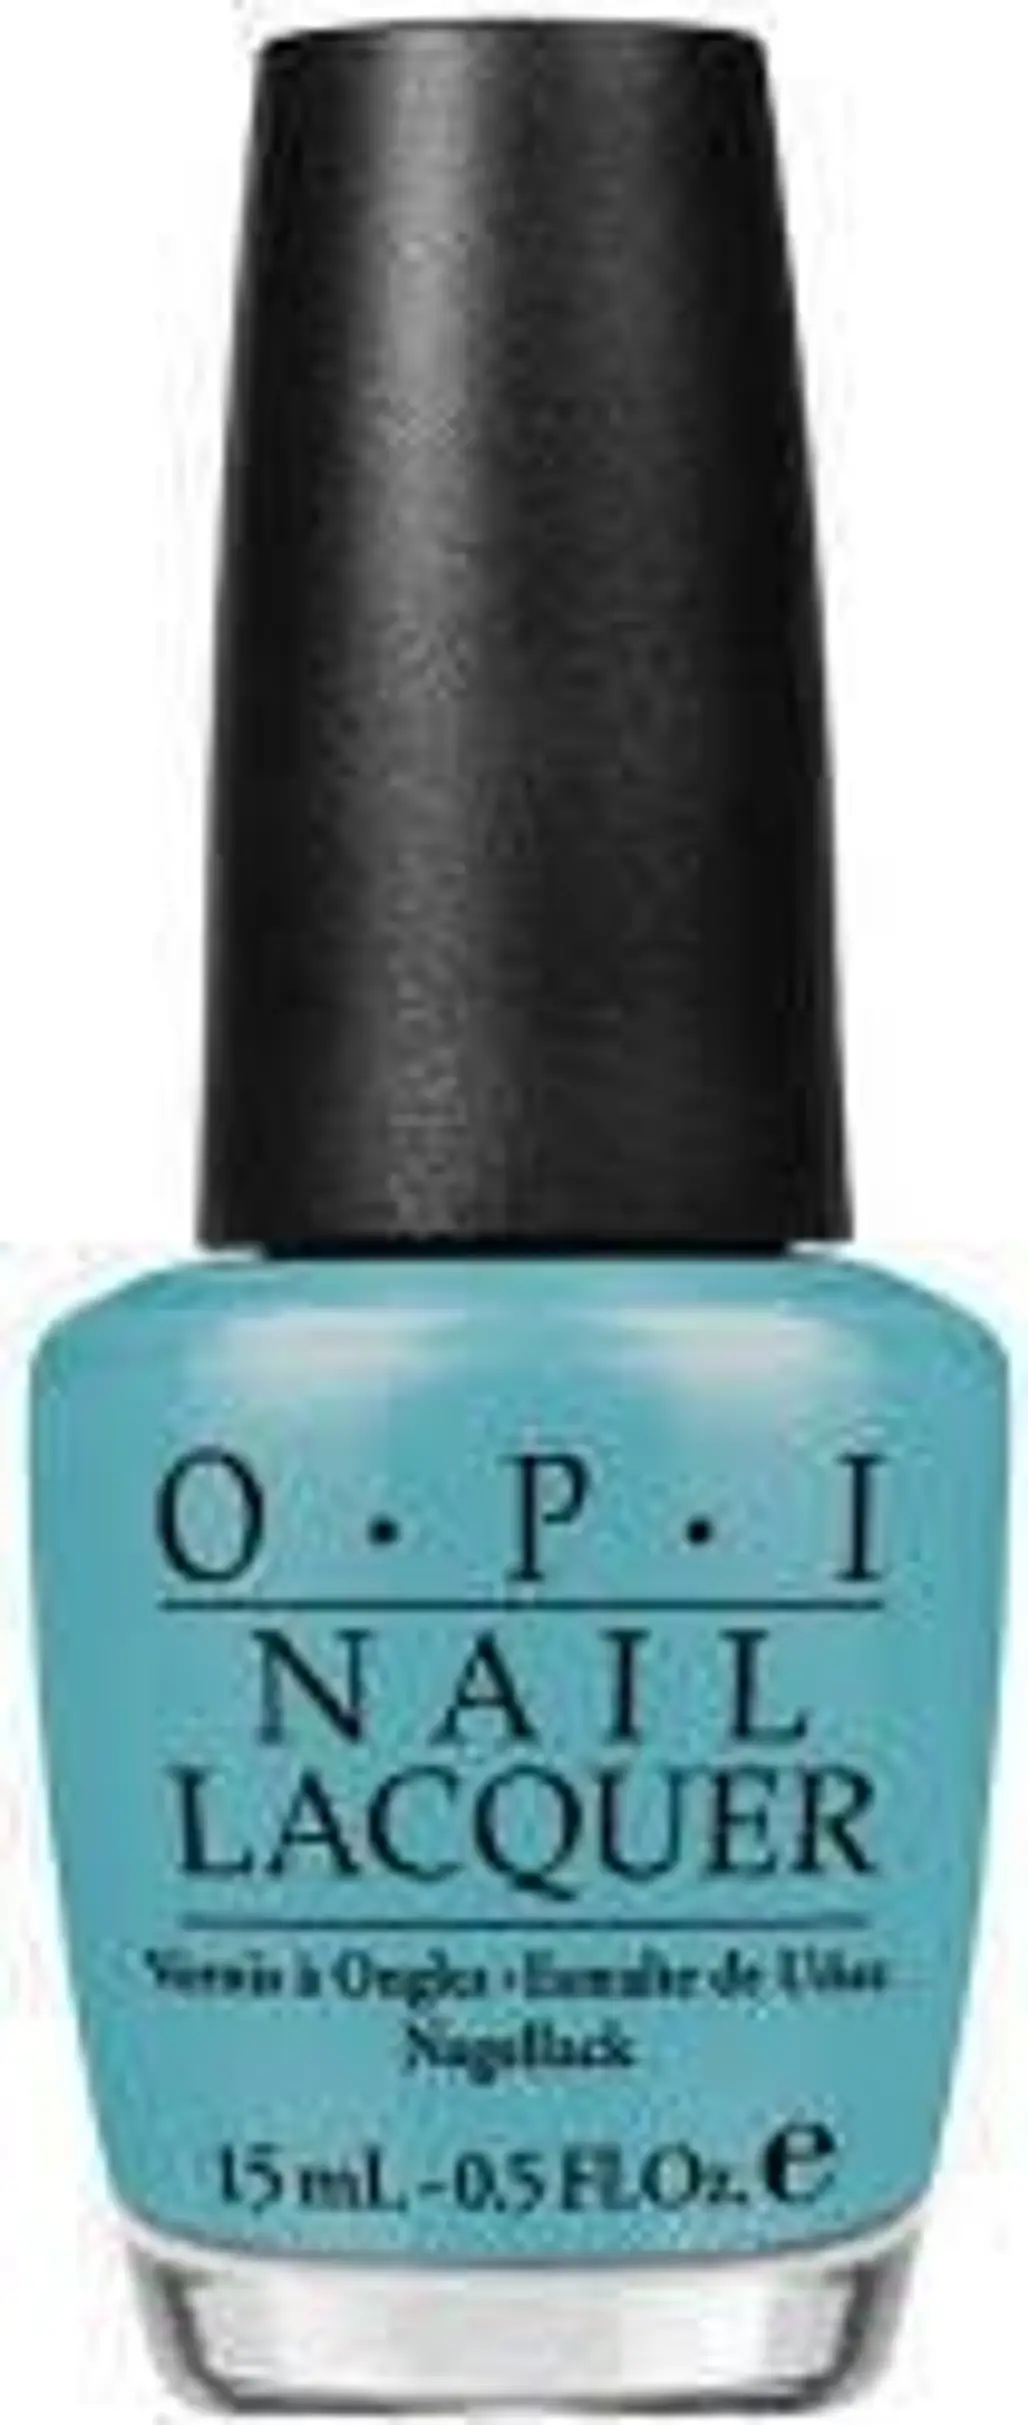 Can’t Find My Czechbook by OPI